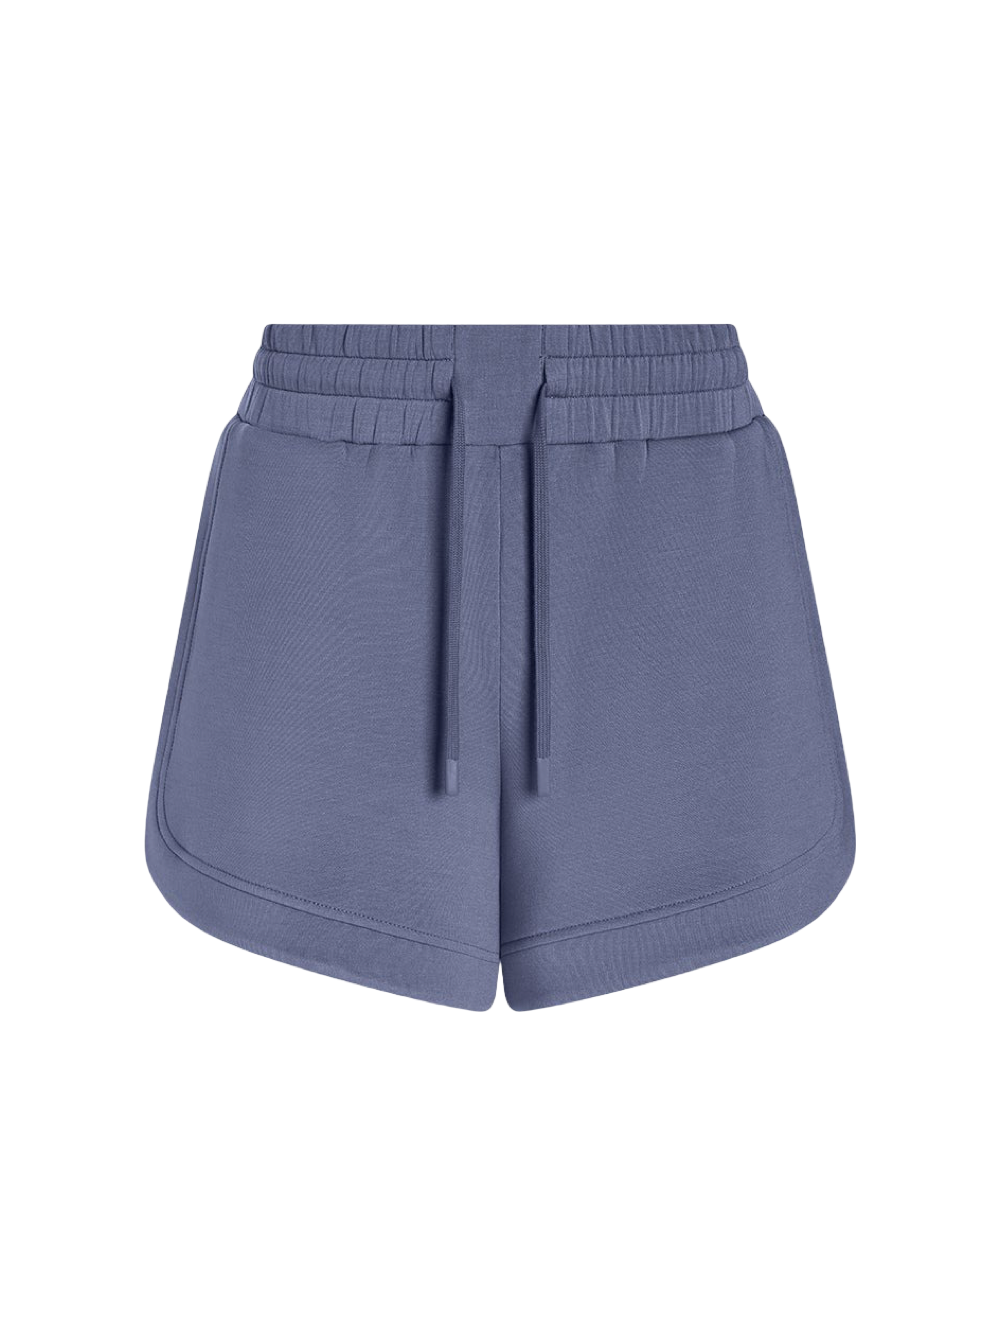 Varley Ollie High Rise Short 3.5 (More Colors)